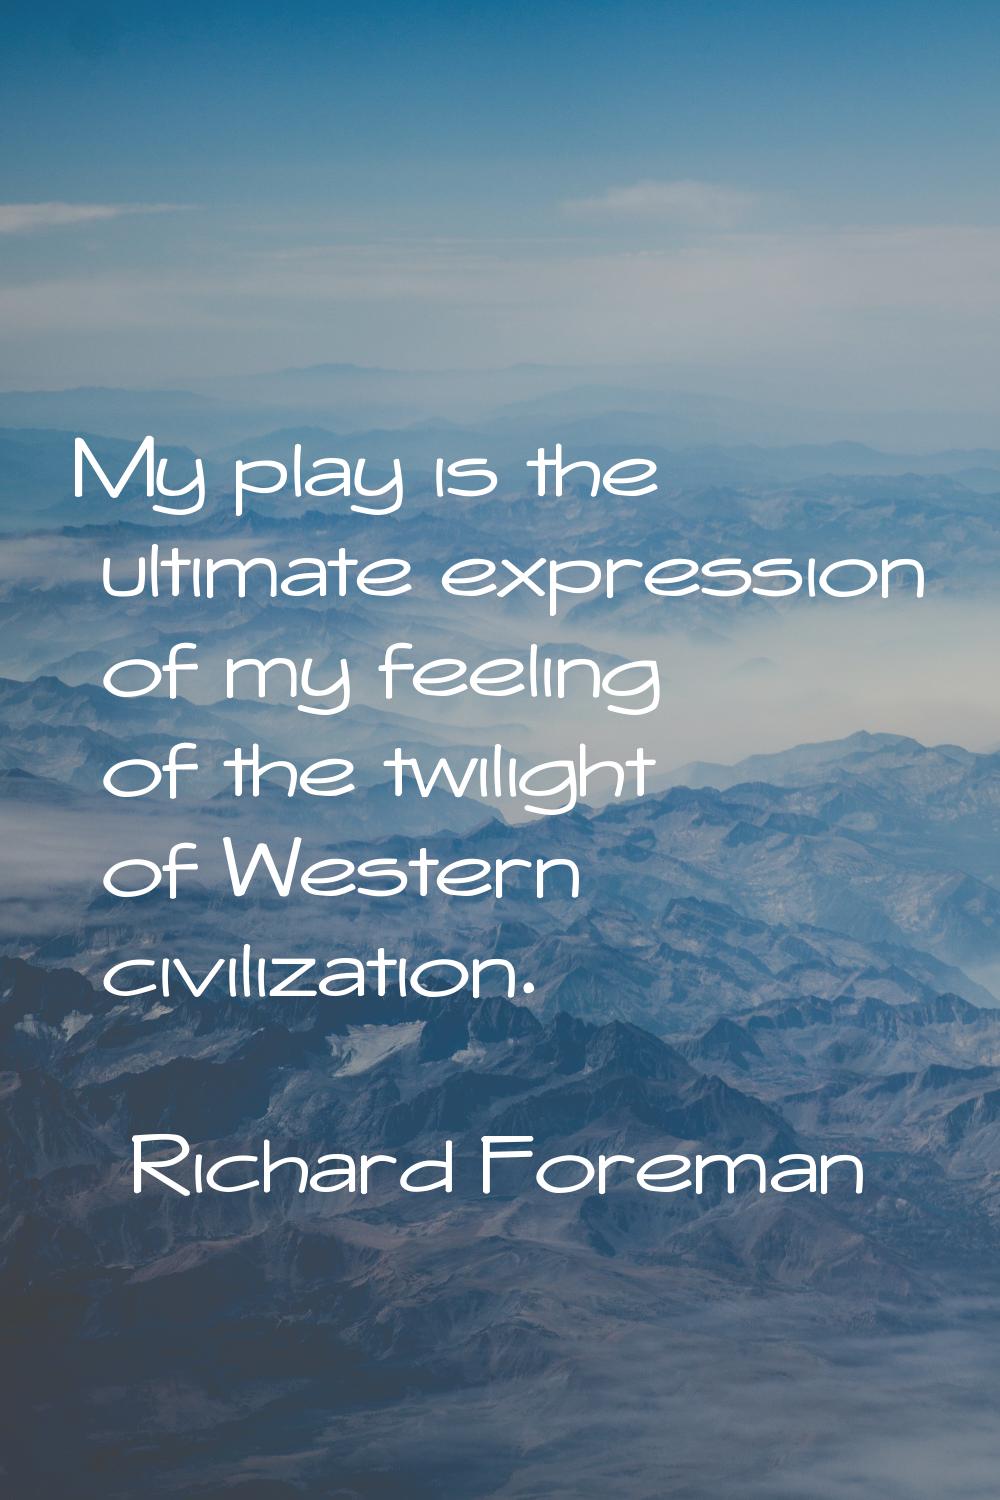 My play is the ultimate expression of my feeling of the twilight of Western civilization.